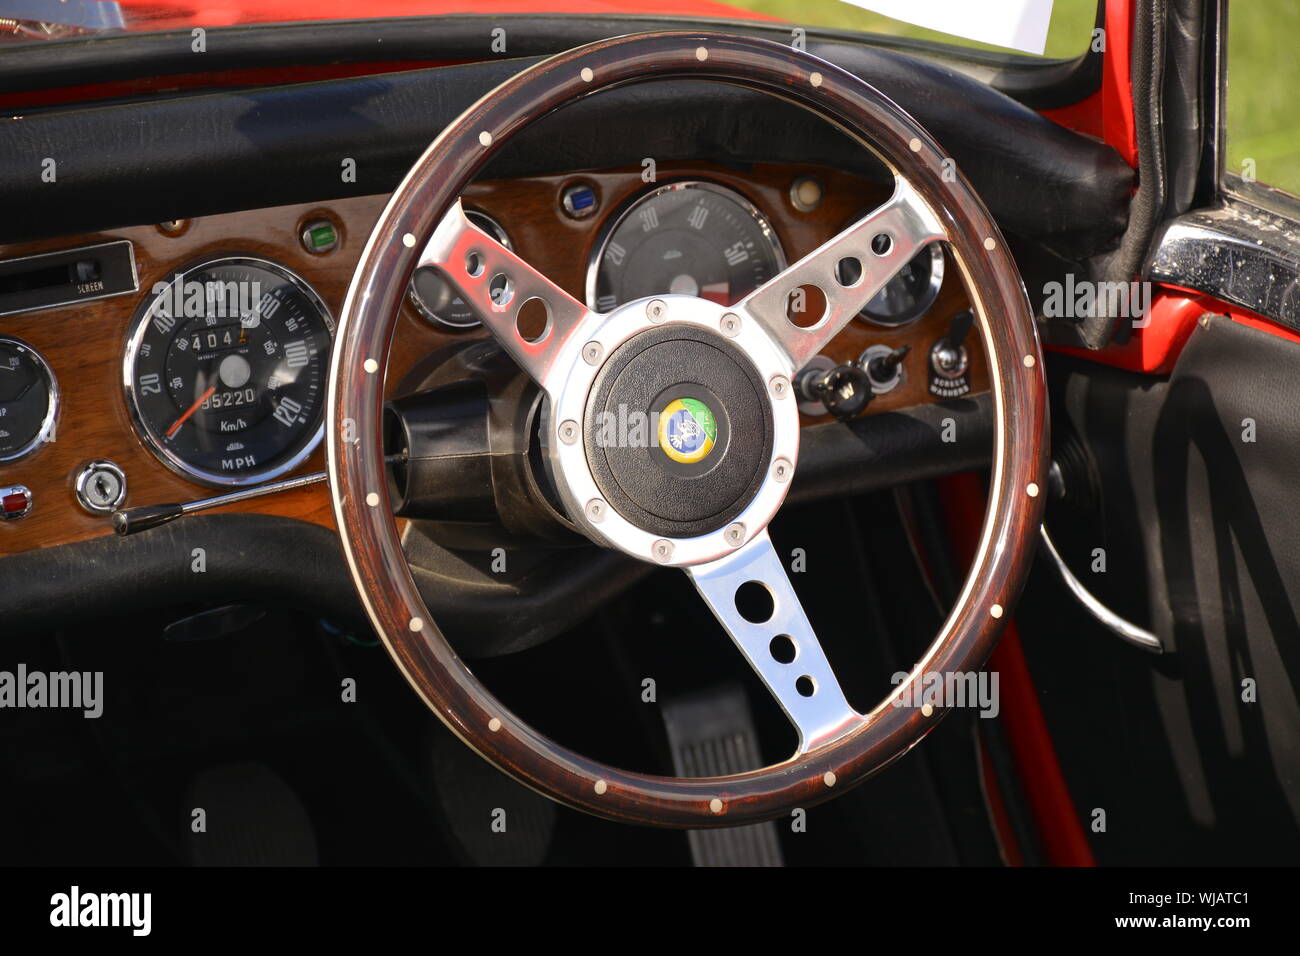 Interior detail of a Sunbeam Alpine classic car showing the steering wheel speedometer and dashboard Stock Photo